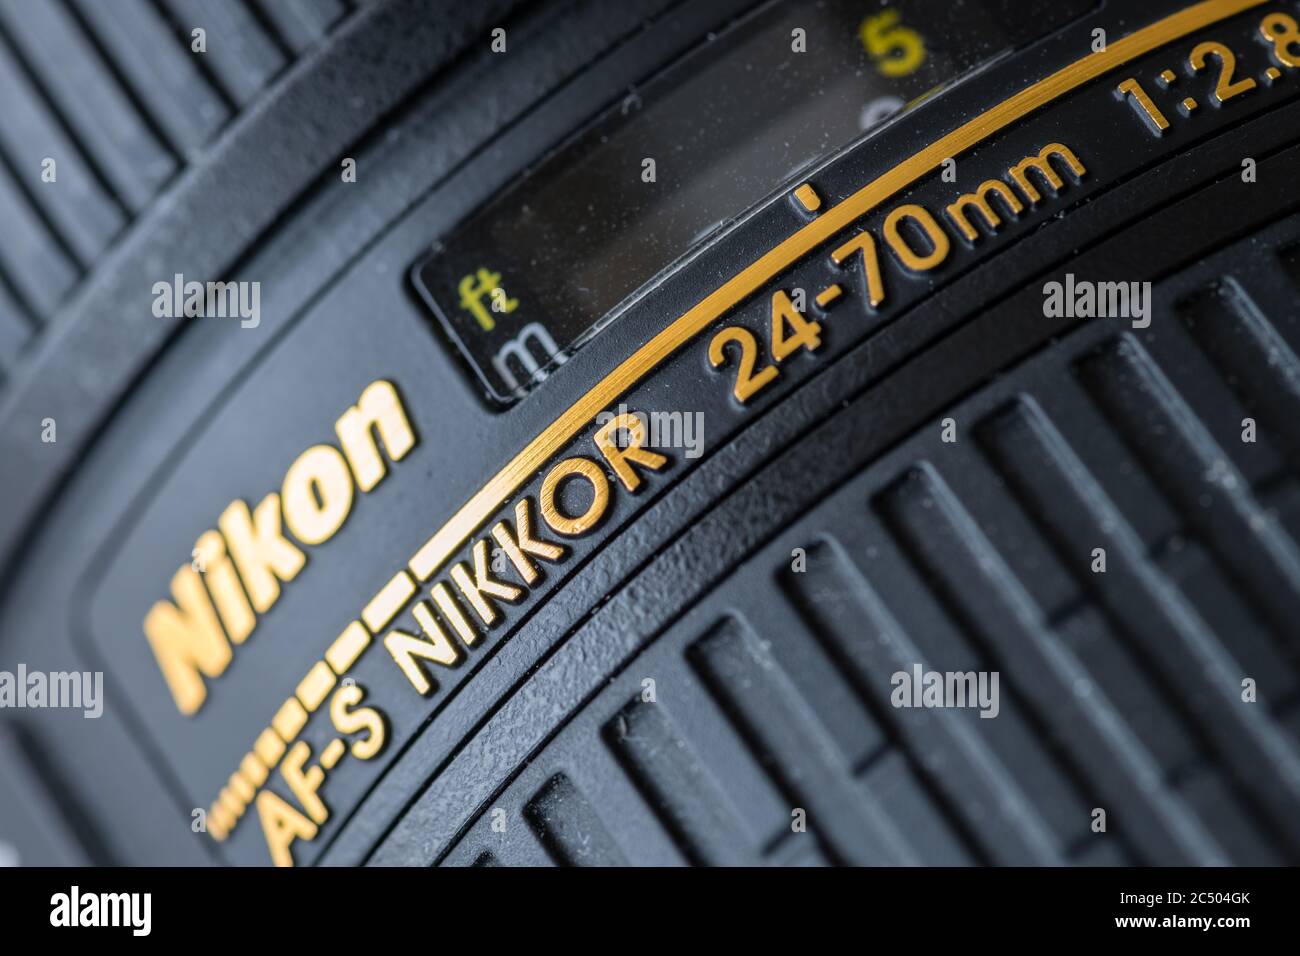 A Nikkor zoom lens from the Japanese company Nikon. Stock Photo